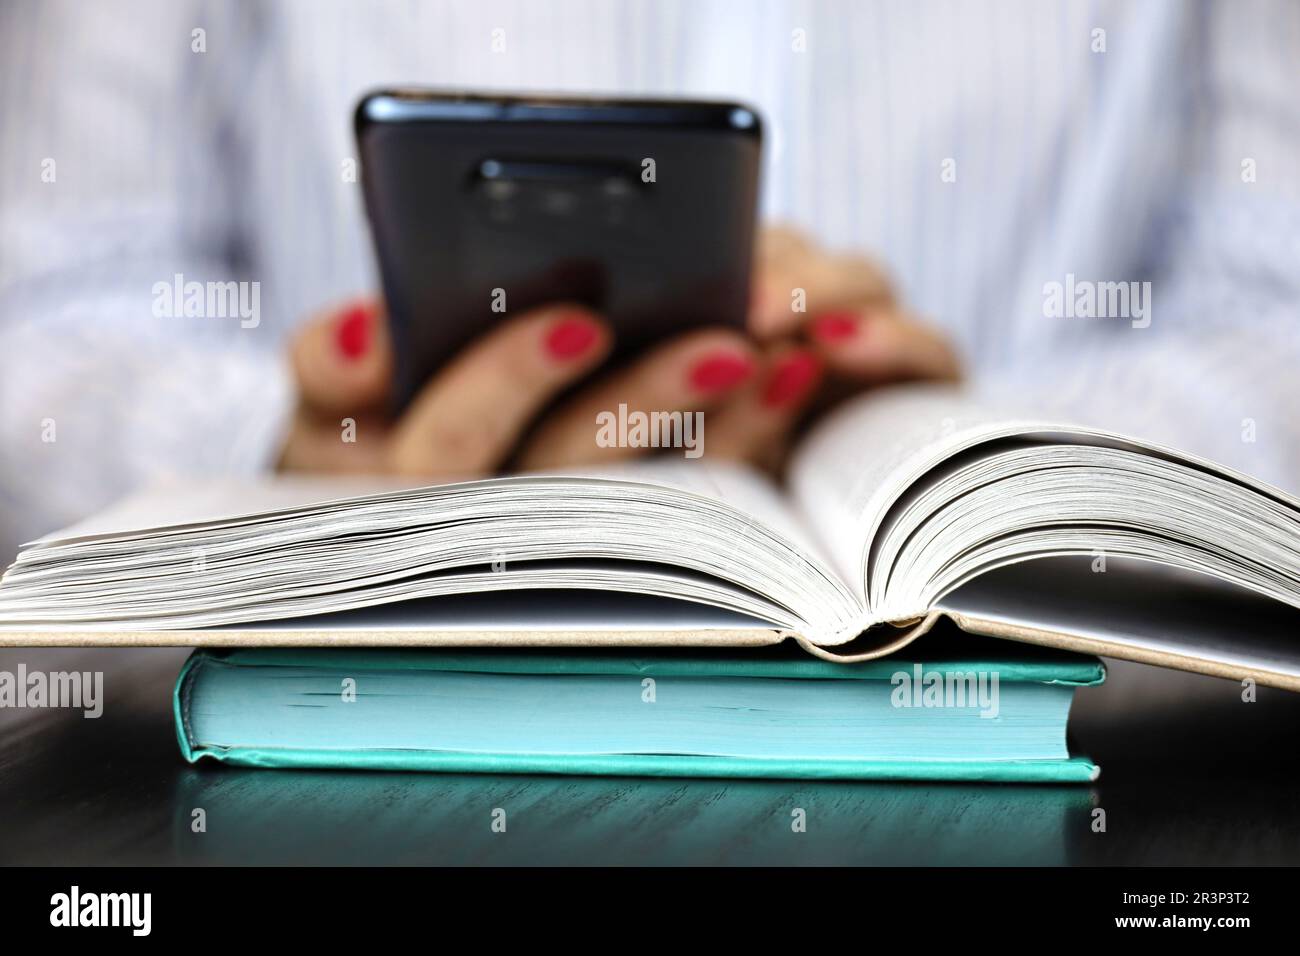 Woman reading a book while sitting at table with smartphone in hands. Concept of education and literature Stock Photo